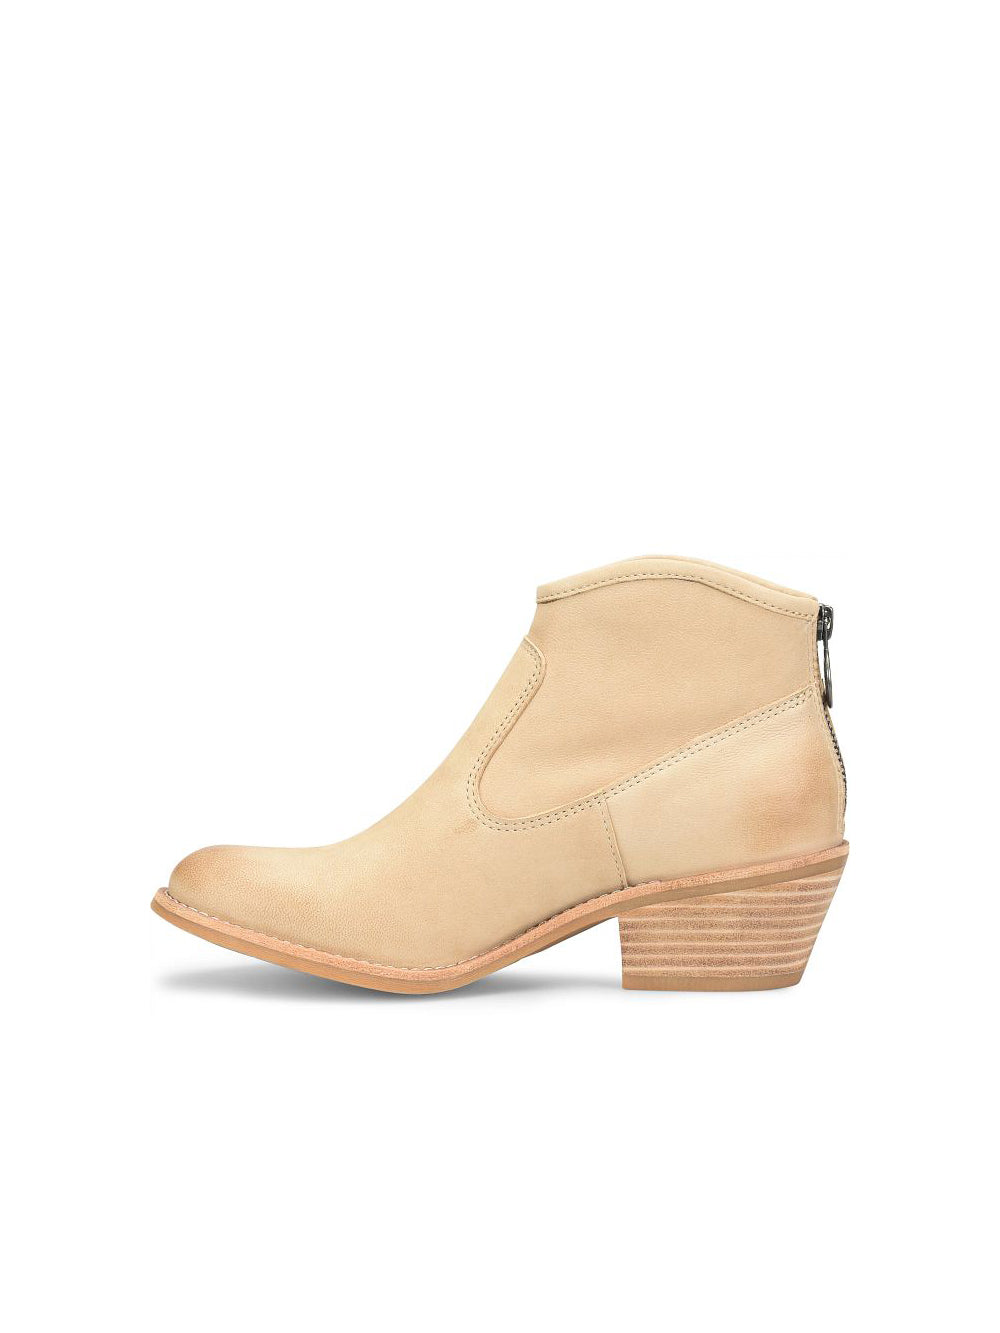 sofft shoes aisley heeled ankle bootie with back zipper in lenox tan leather